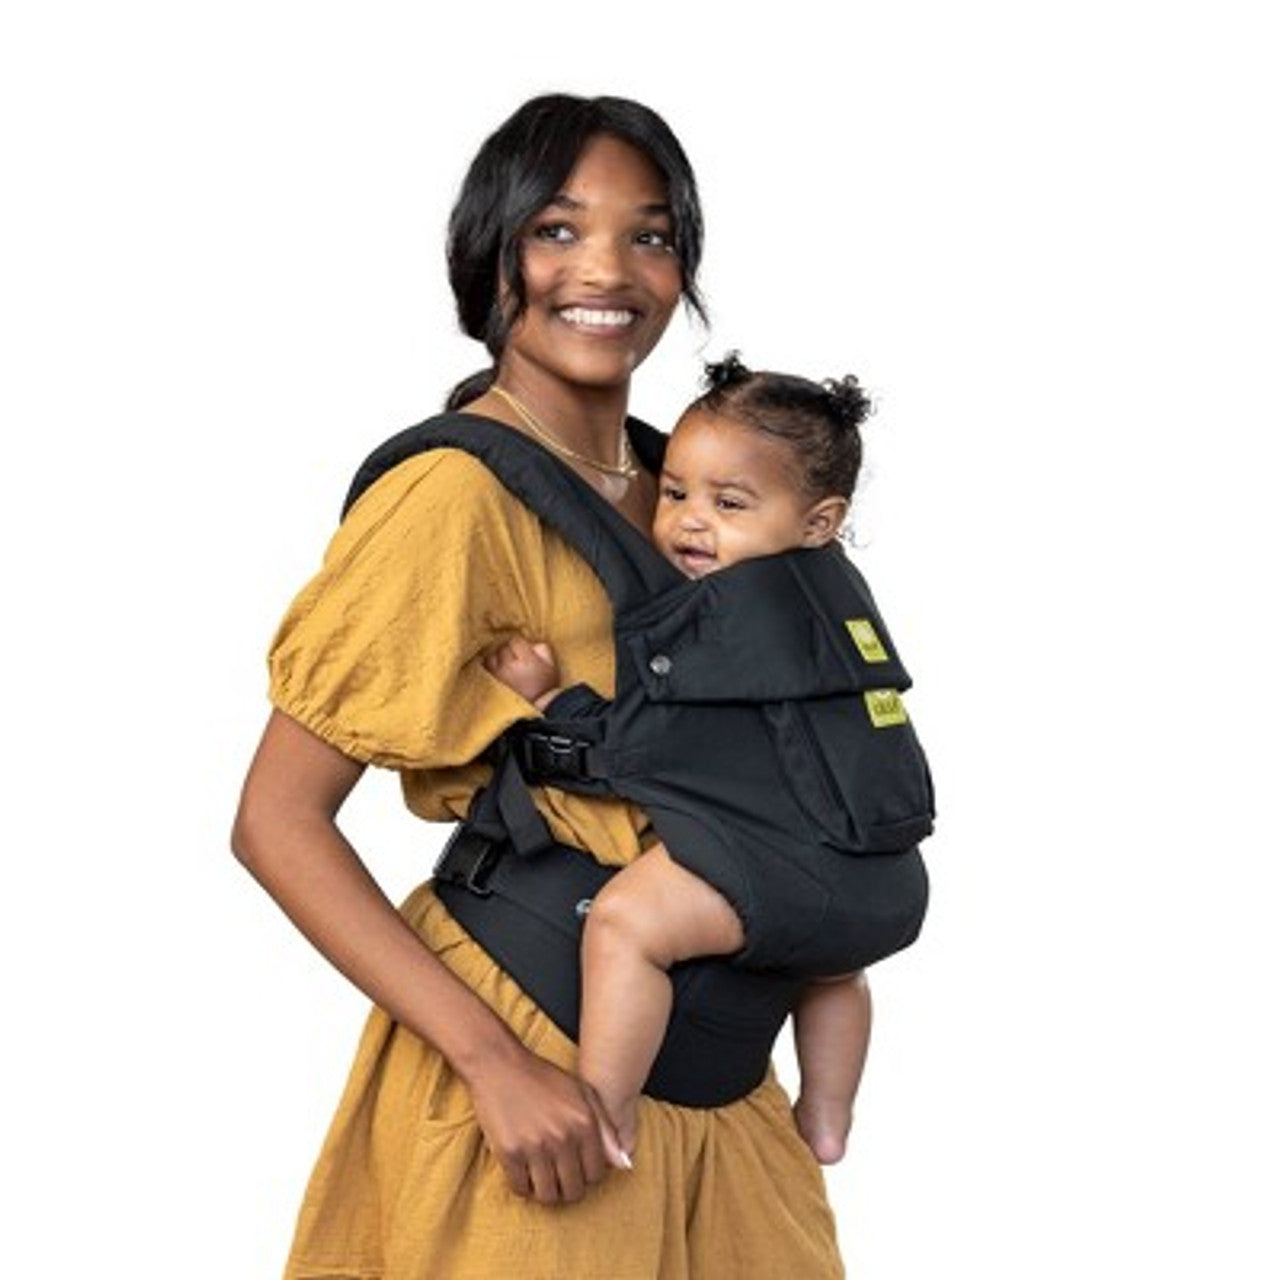 New - LILLEbaby Complete Original 6-in-1 Baby Carrier - Black